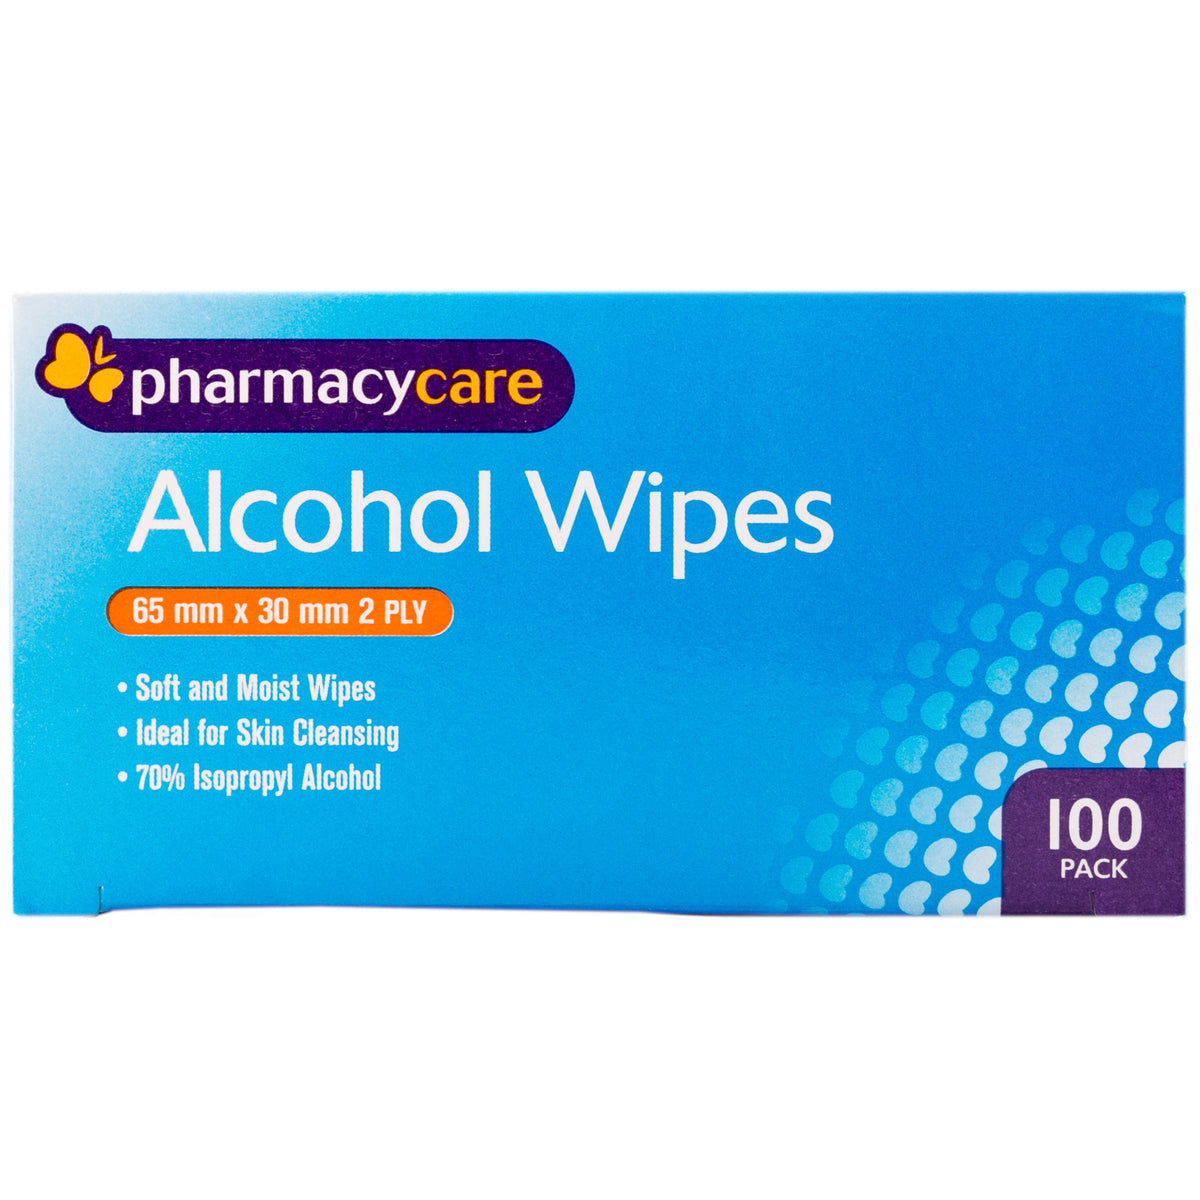 Pharmacy Care Alcohol Wipes 100 Pack